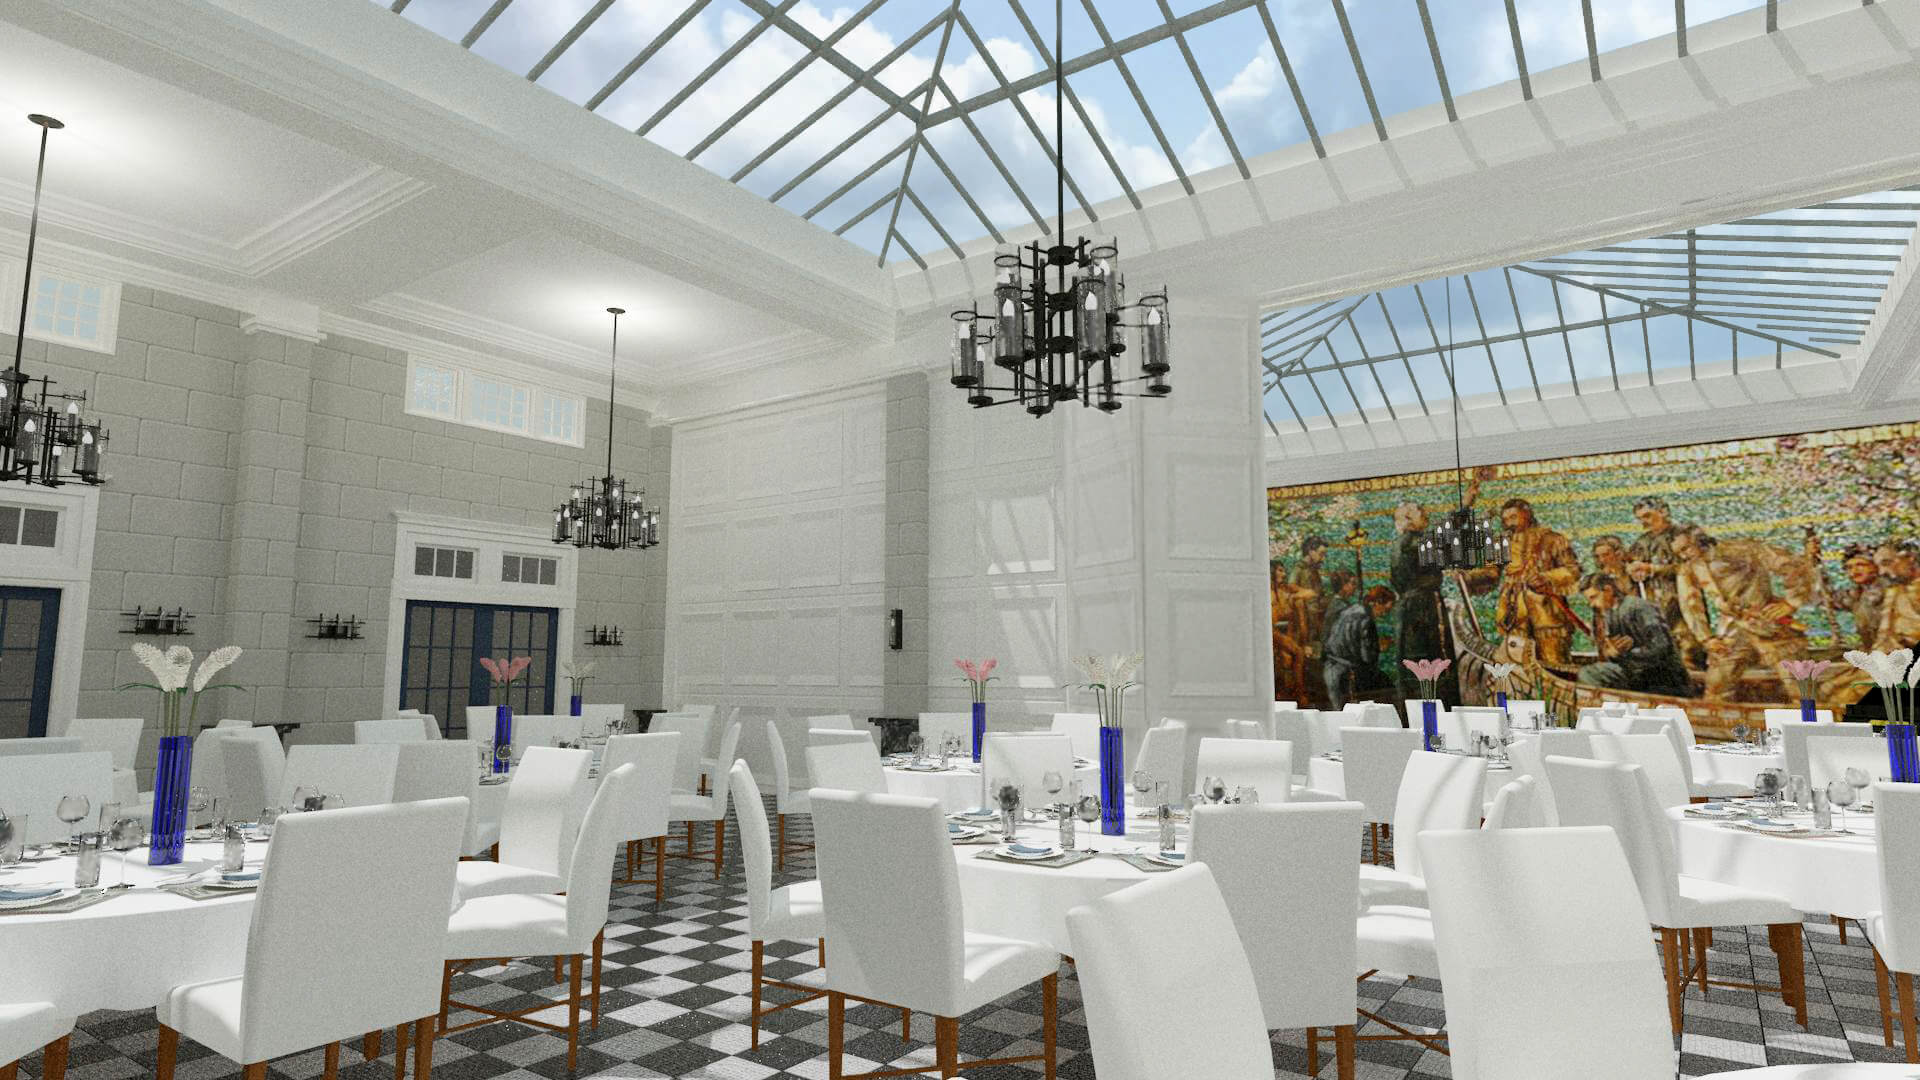 Rendering of new proposed ballroom within Kaskaskia hotel. Large atrium filled with light from skylight windows. White table clothes and chairs and colorful hand painted mural on wall